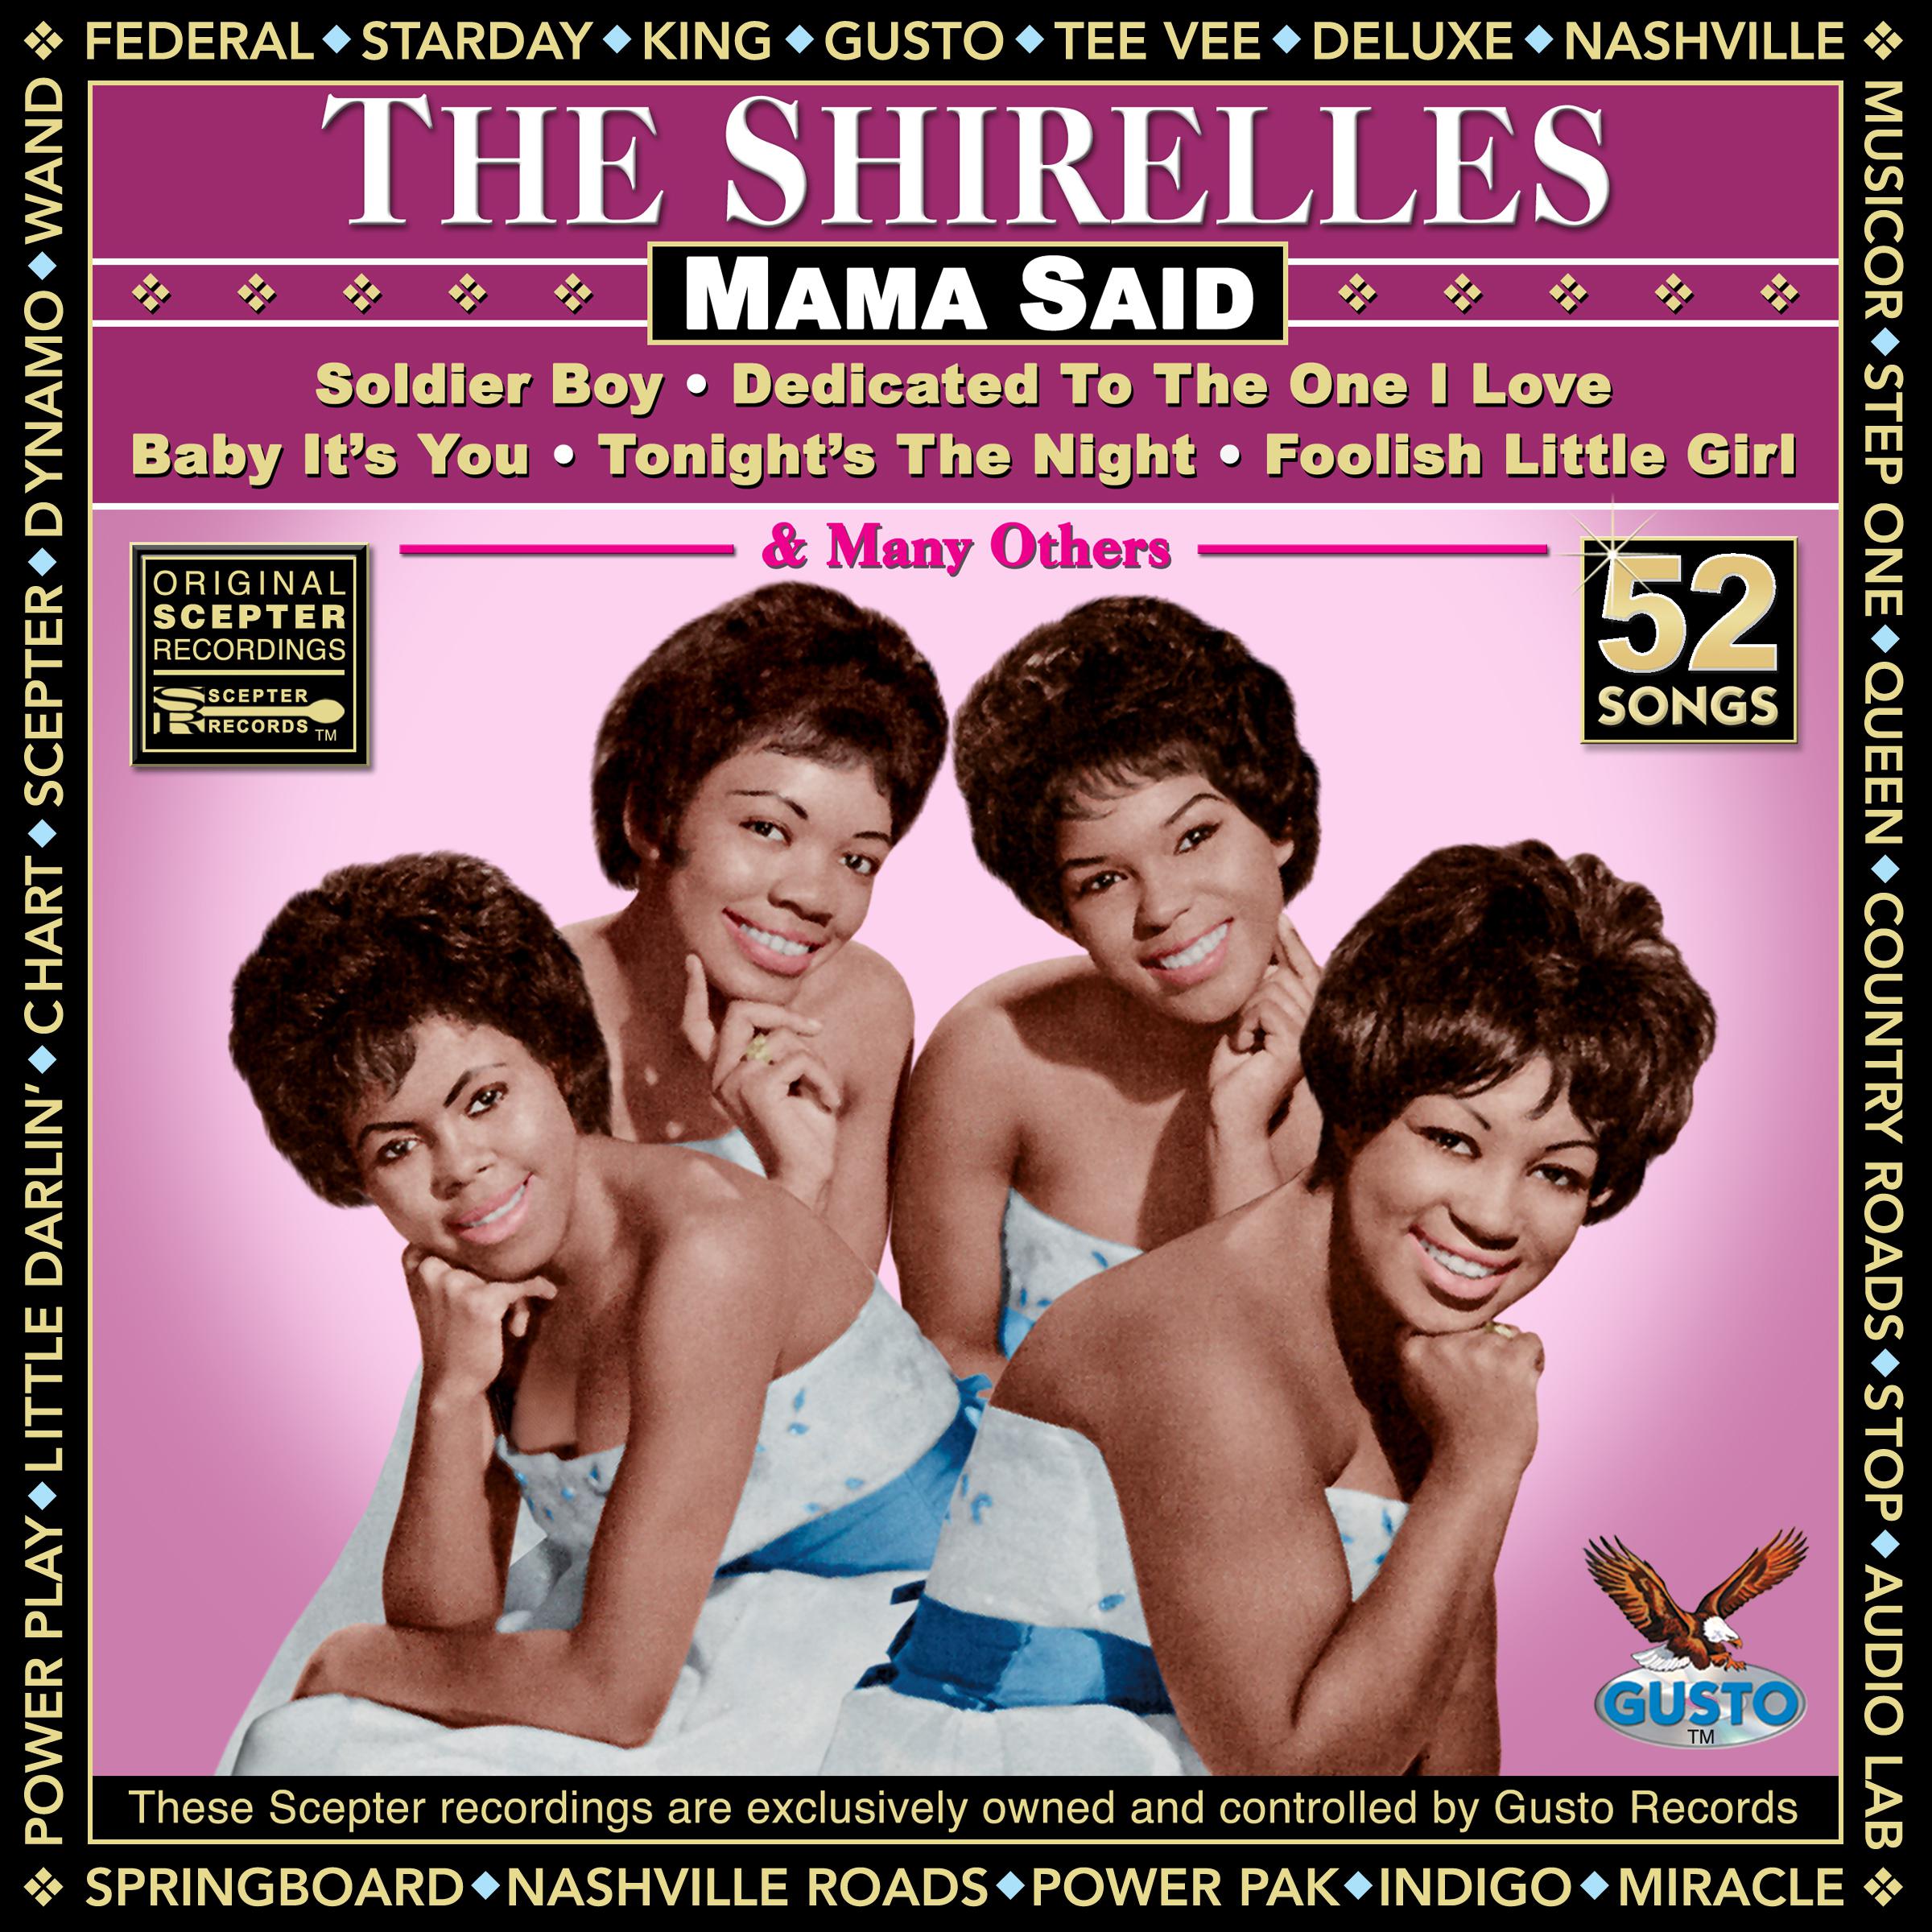 The Shirelles - Love Is A Swingin' Thing (Original Scepter Records Recording)